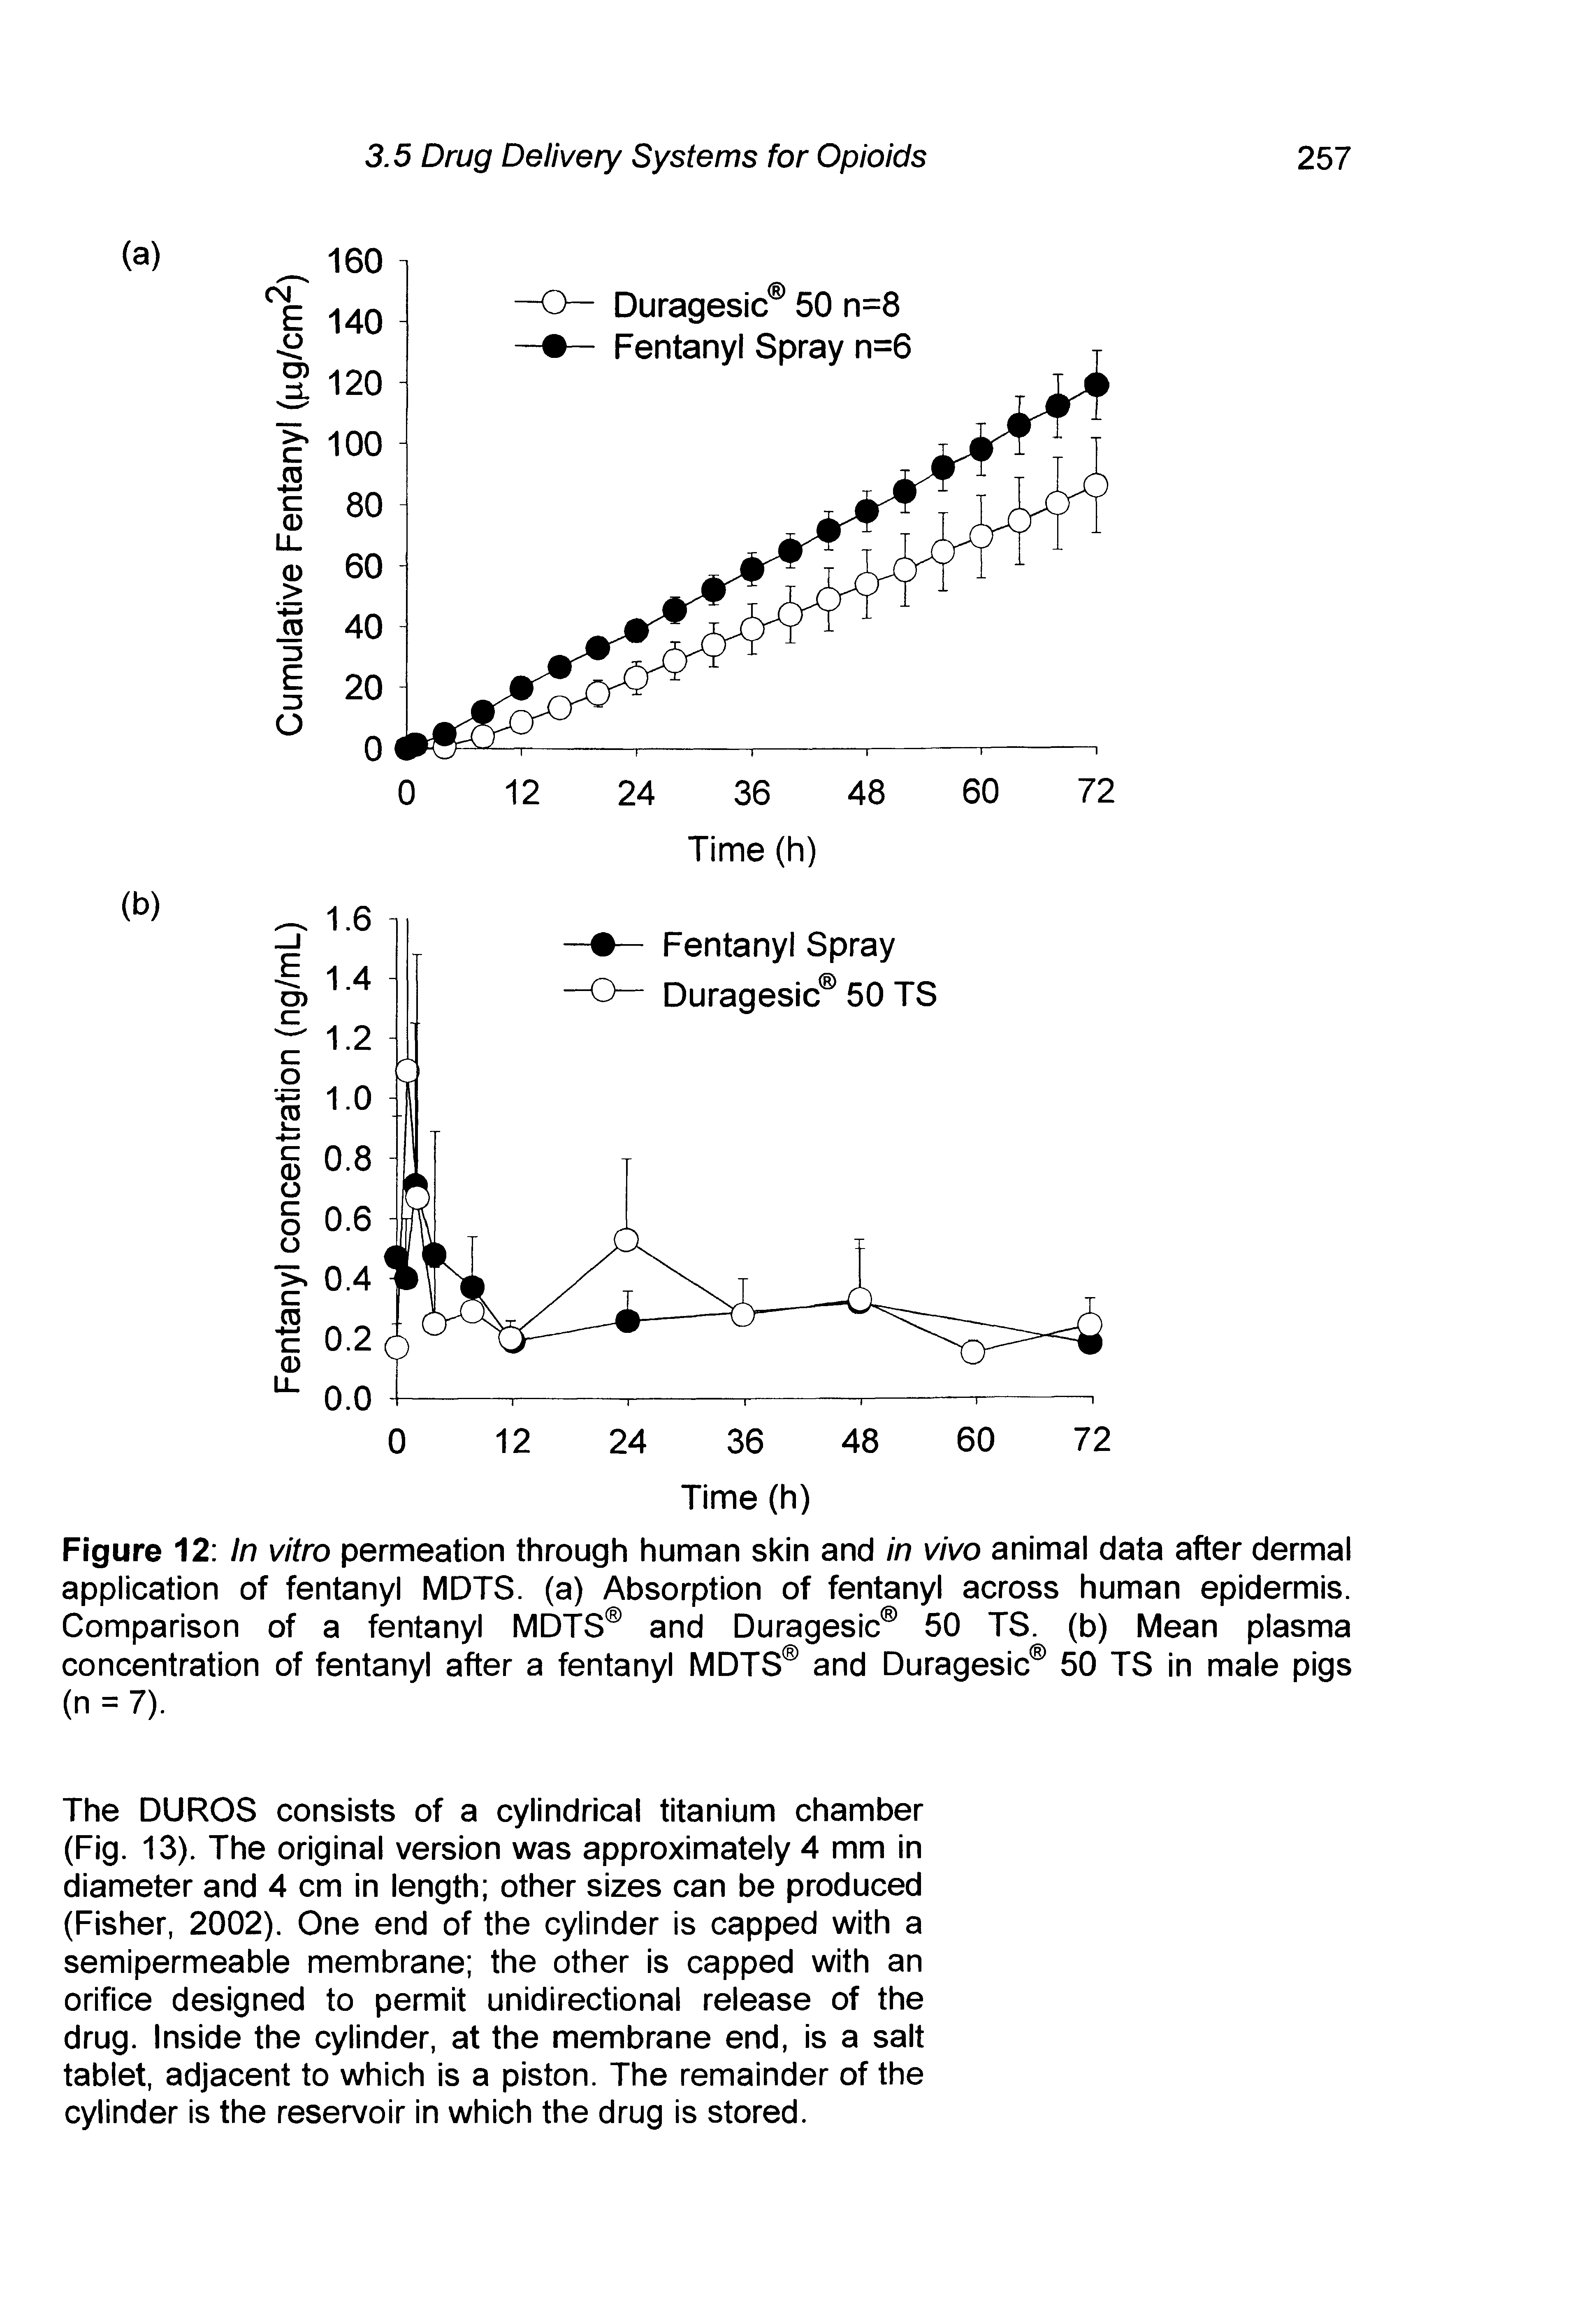 Figure 12 In vitro permeation through human skin and in vivo animal data after dermal application of fentanyl MDTS. (a) Absorption of fentanyl across human epidermis. Comparison of a fentanyl MDTS and Duragesic 50 TS. (b) Mean plasma concentration of fentanyl after a fentanyl MDTS and Duragesic 50 TS in male pigs (n = 7).